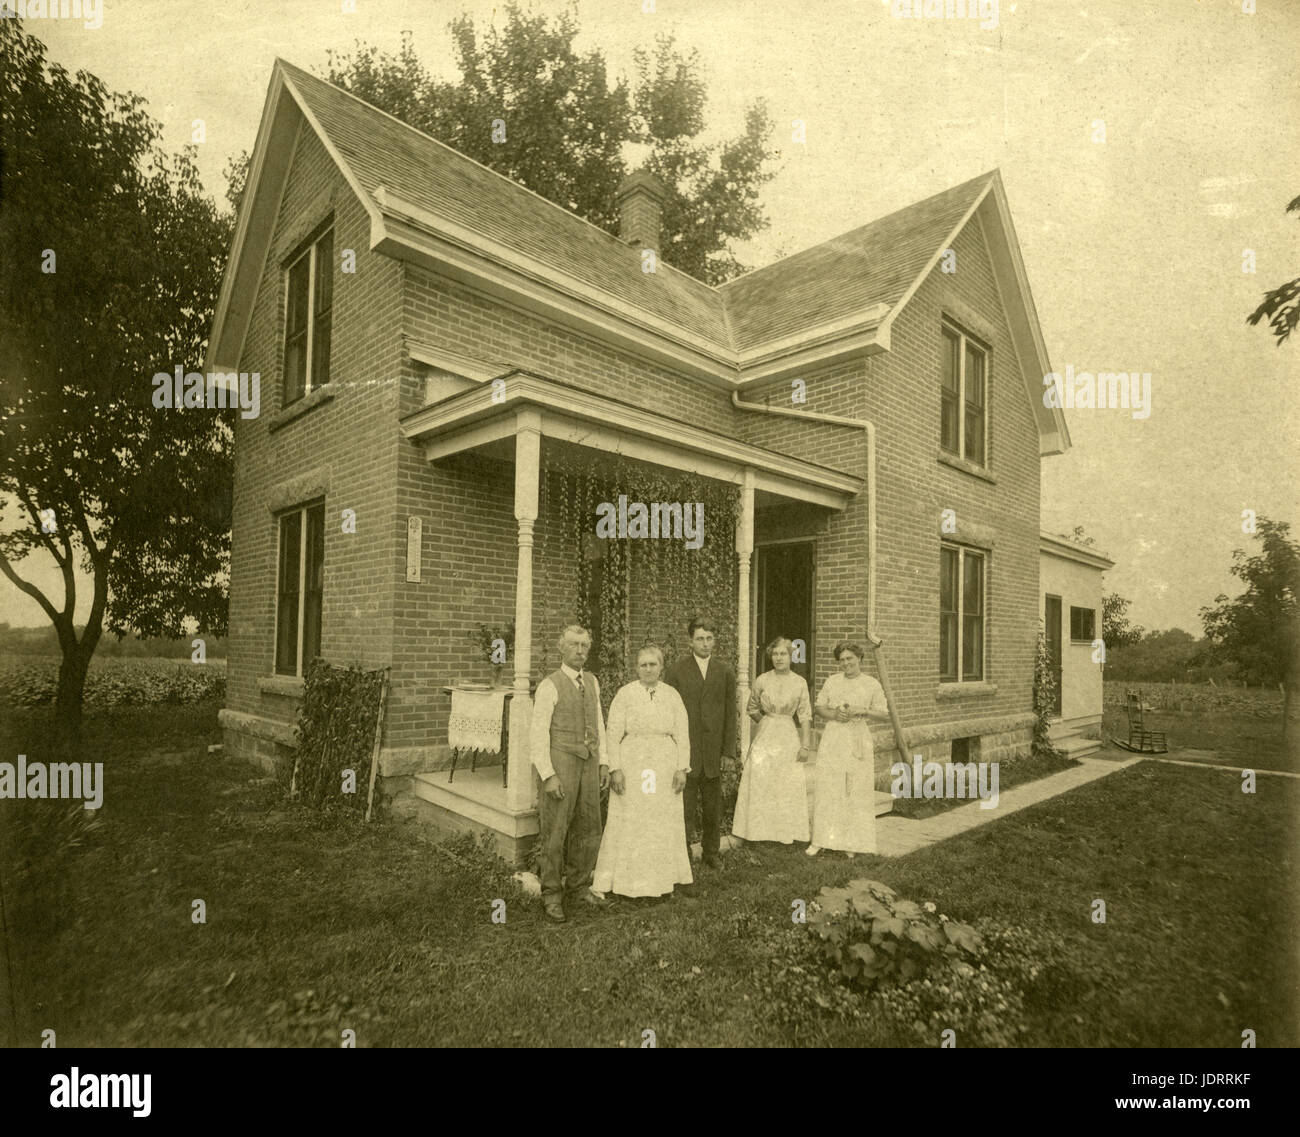 Antique c1910 photograph, group family photograph outside their house. Location is probably in or near  Mankato, Minnesota.  SOURCE: ORIGINAL PHOTOGRAPH. Stock Photo